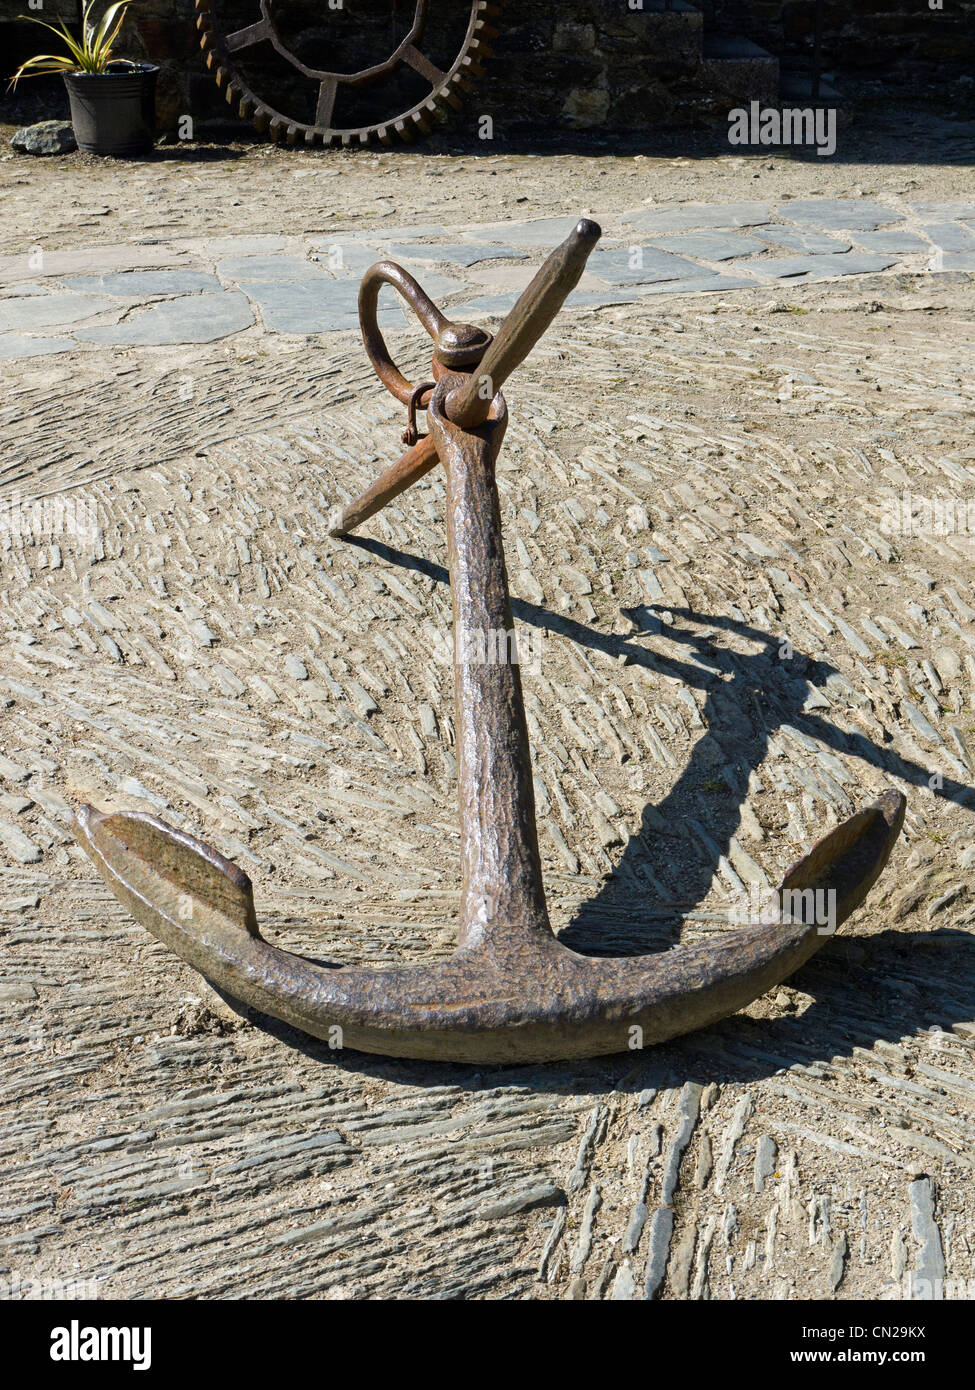 Old Ship Anchor Image & Photo (Free Trial), old ship anchor 